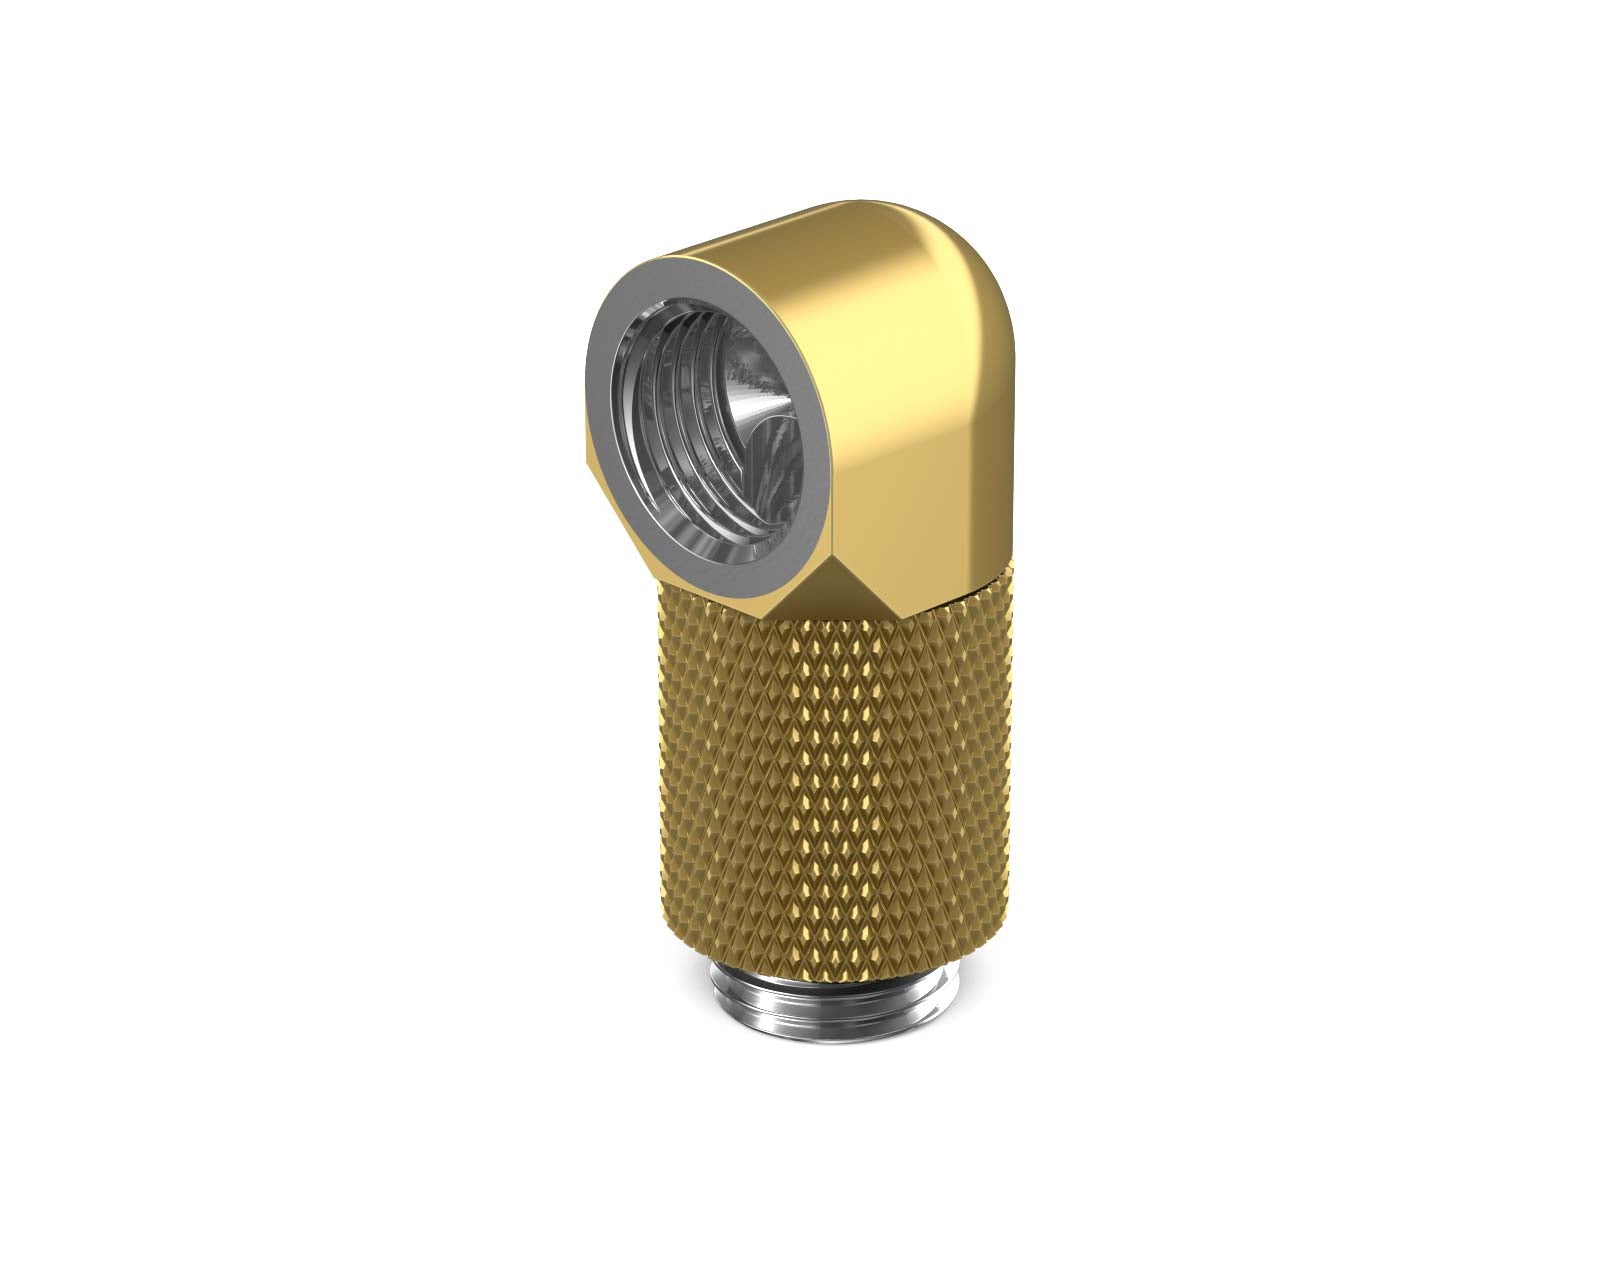 PrimoChill Male to Female G 1/4in. 90 Degree SX Rotary 20mm Extension Elbow Fitting - PrimoChill - KEEPING IT COOL Candy Gold